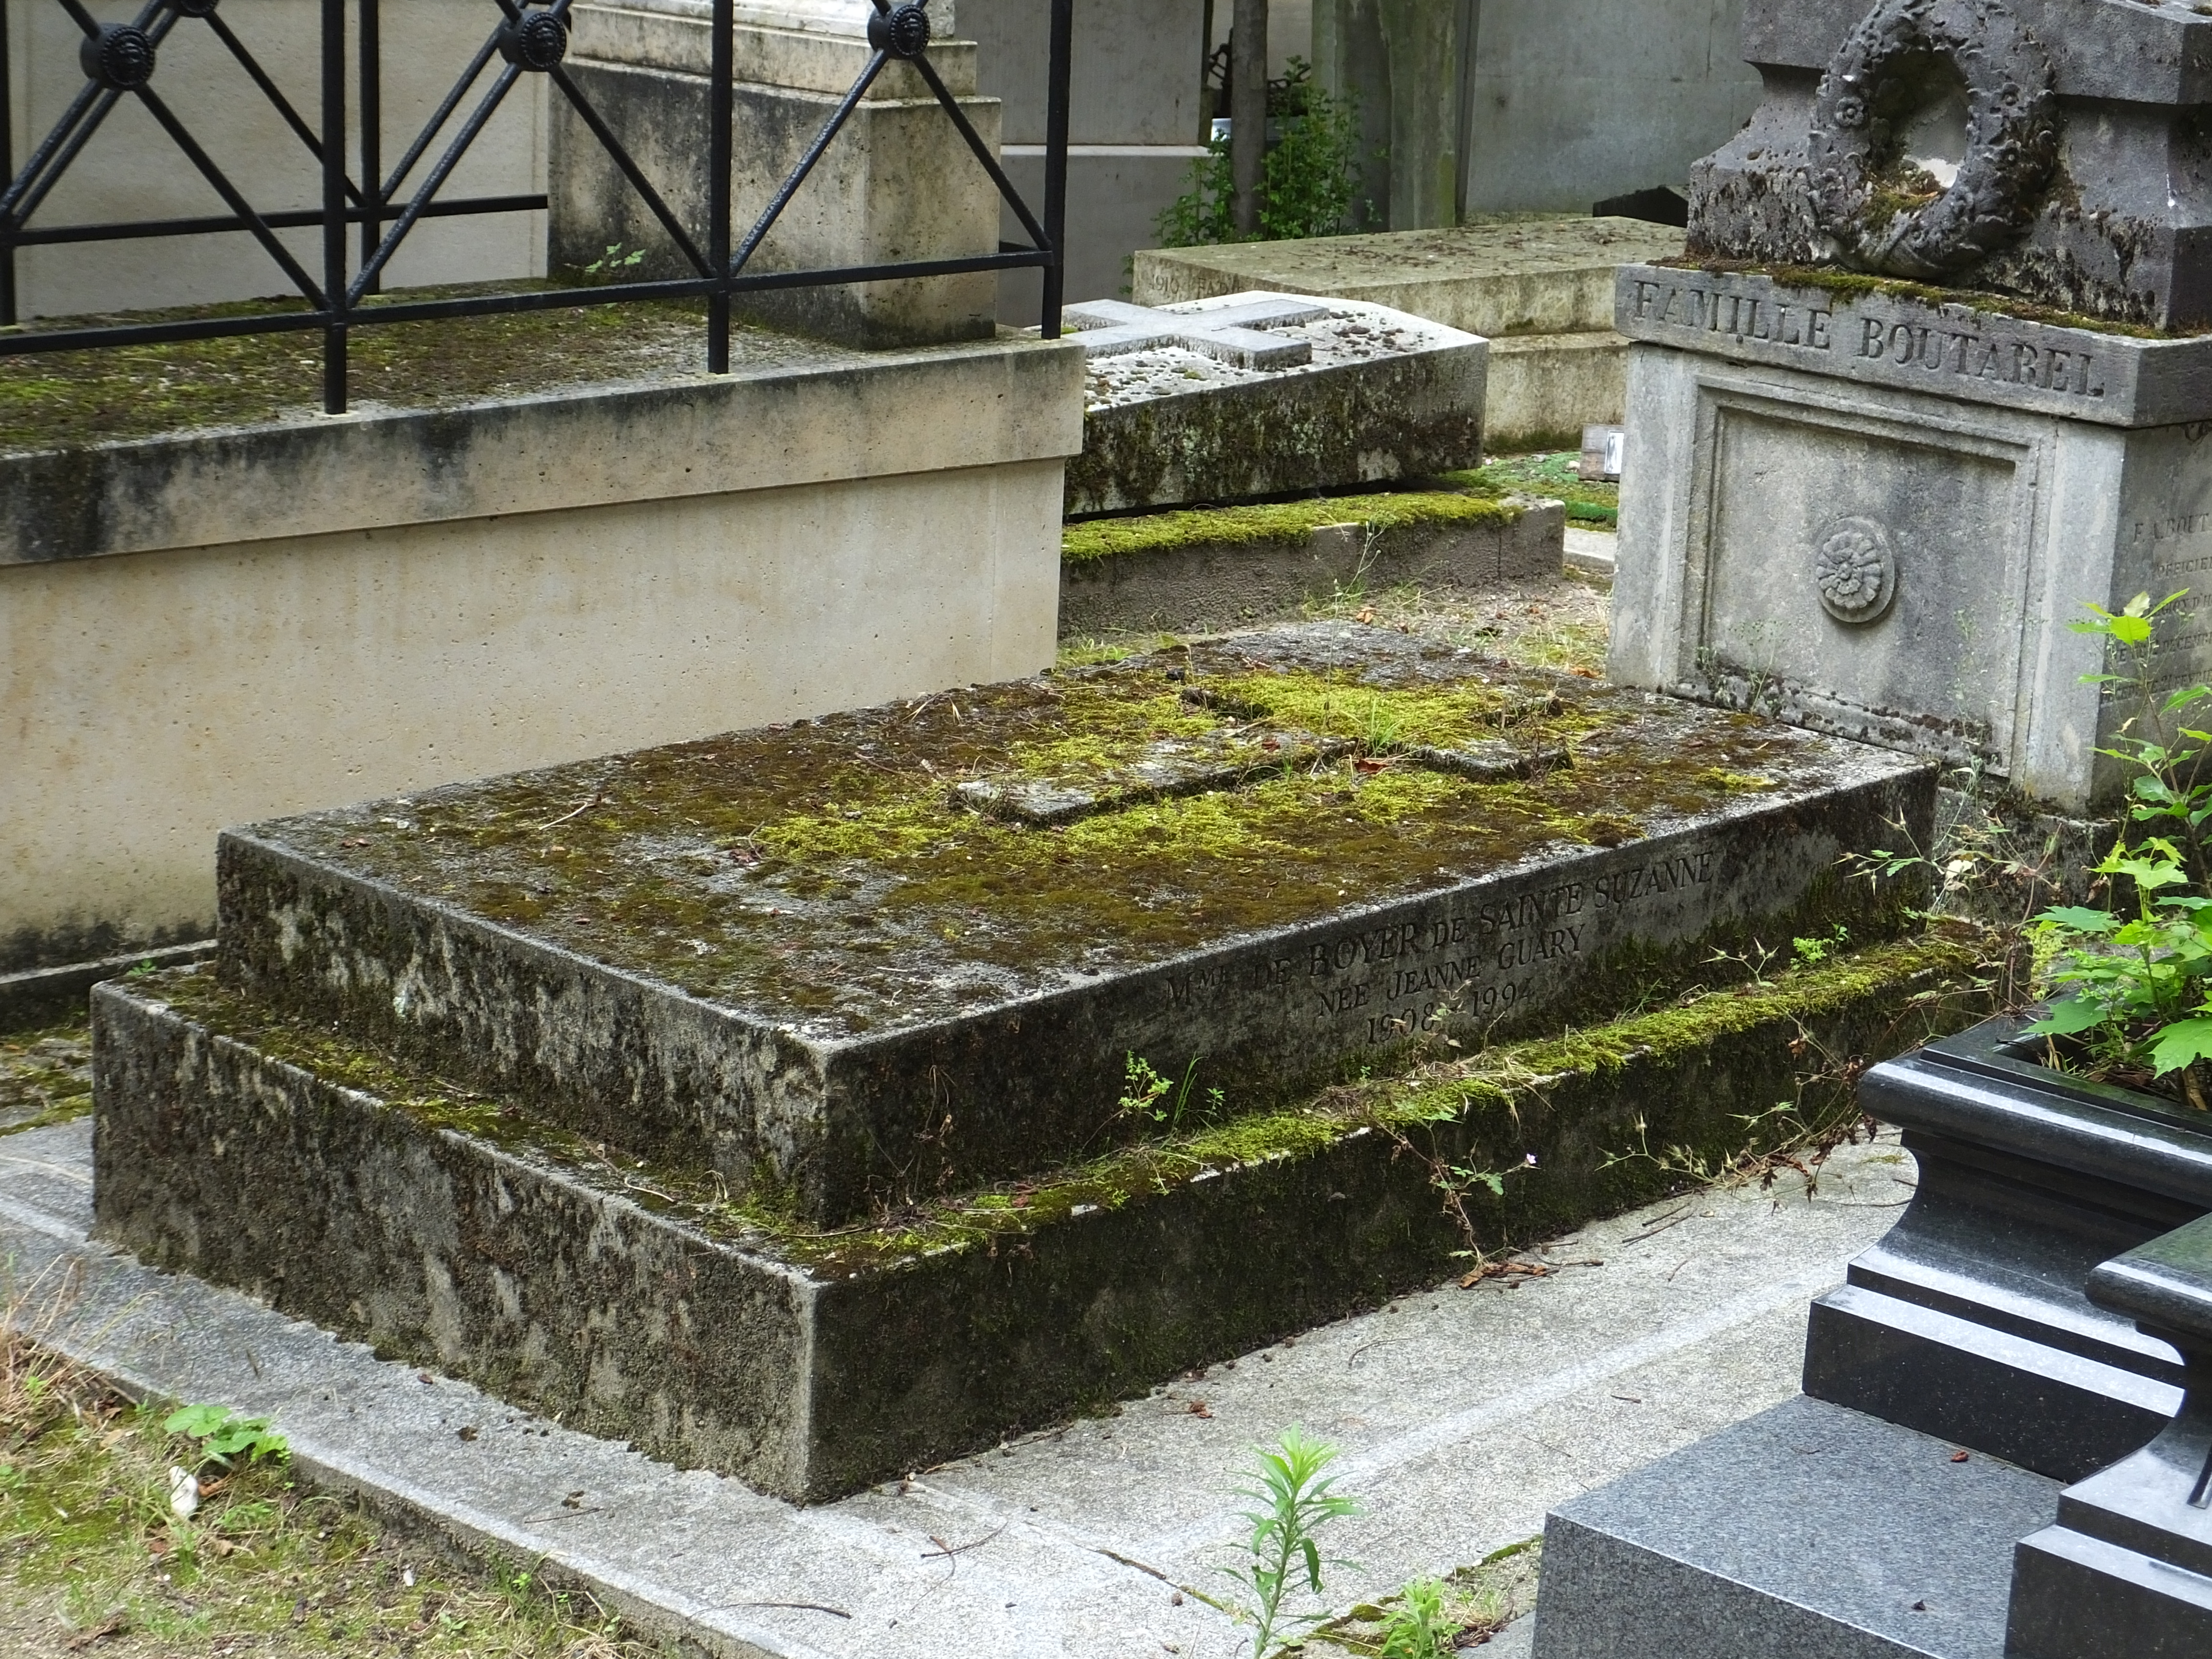 An abandoned tomb. Plots are sold in perpetuity which means they can never be removed.